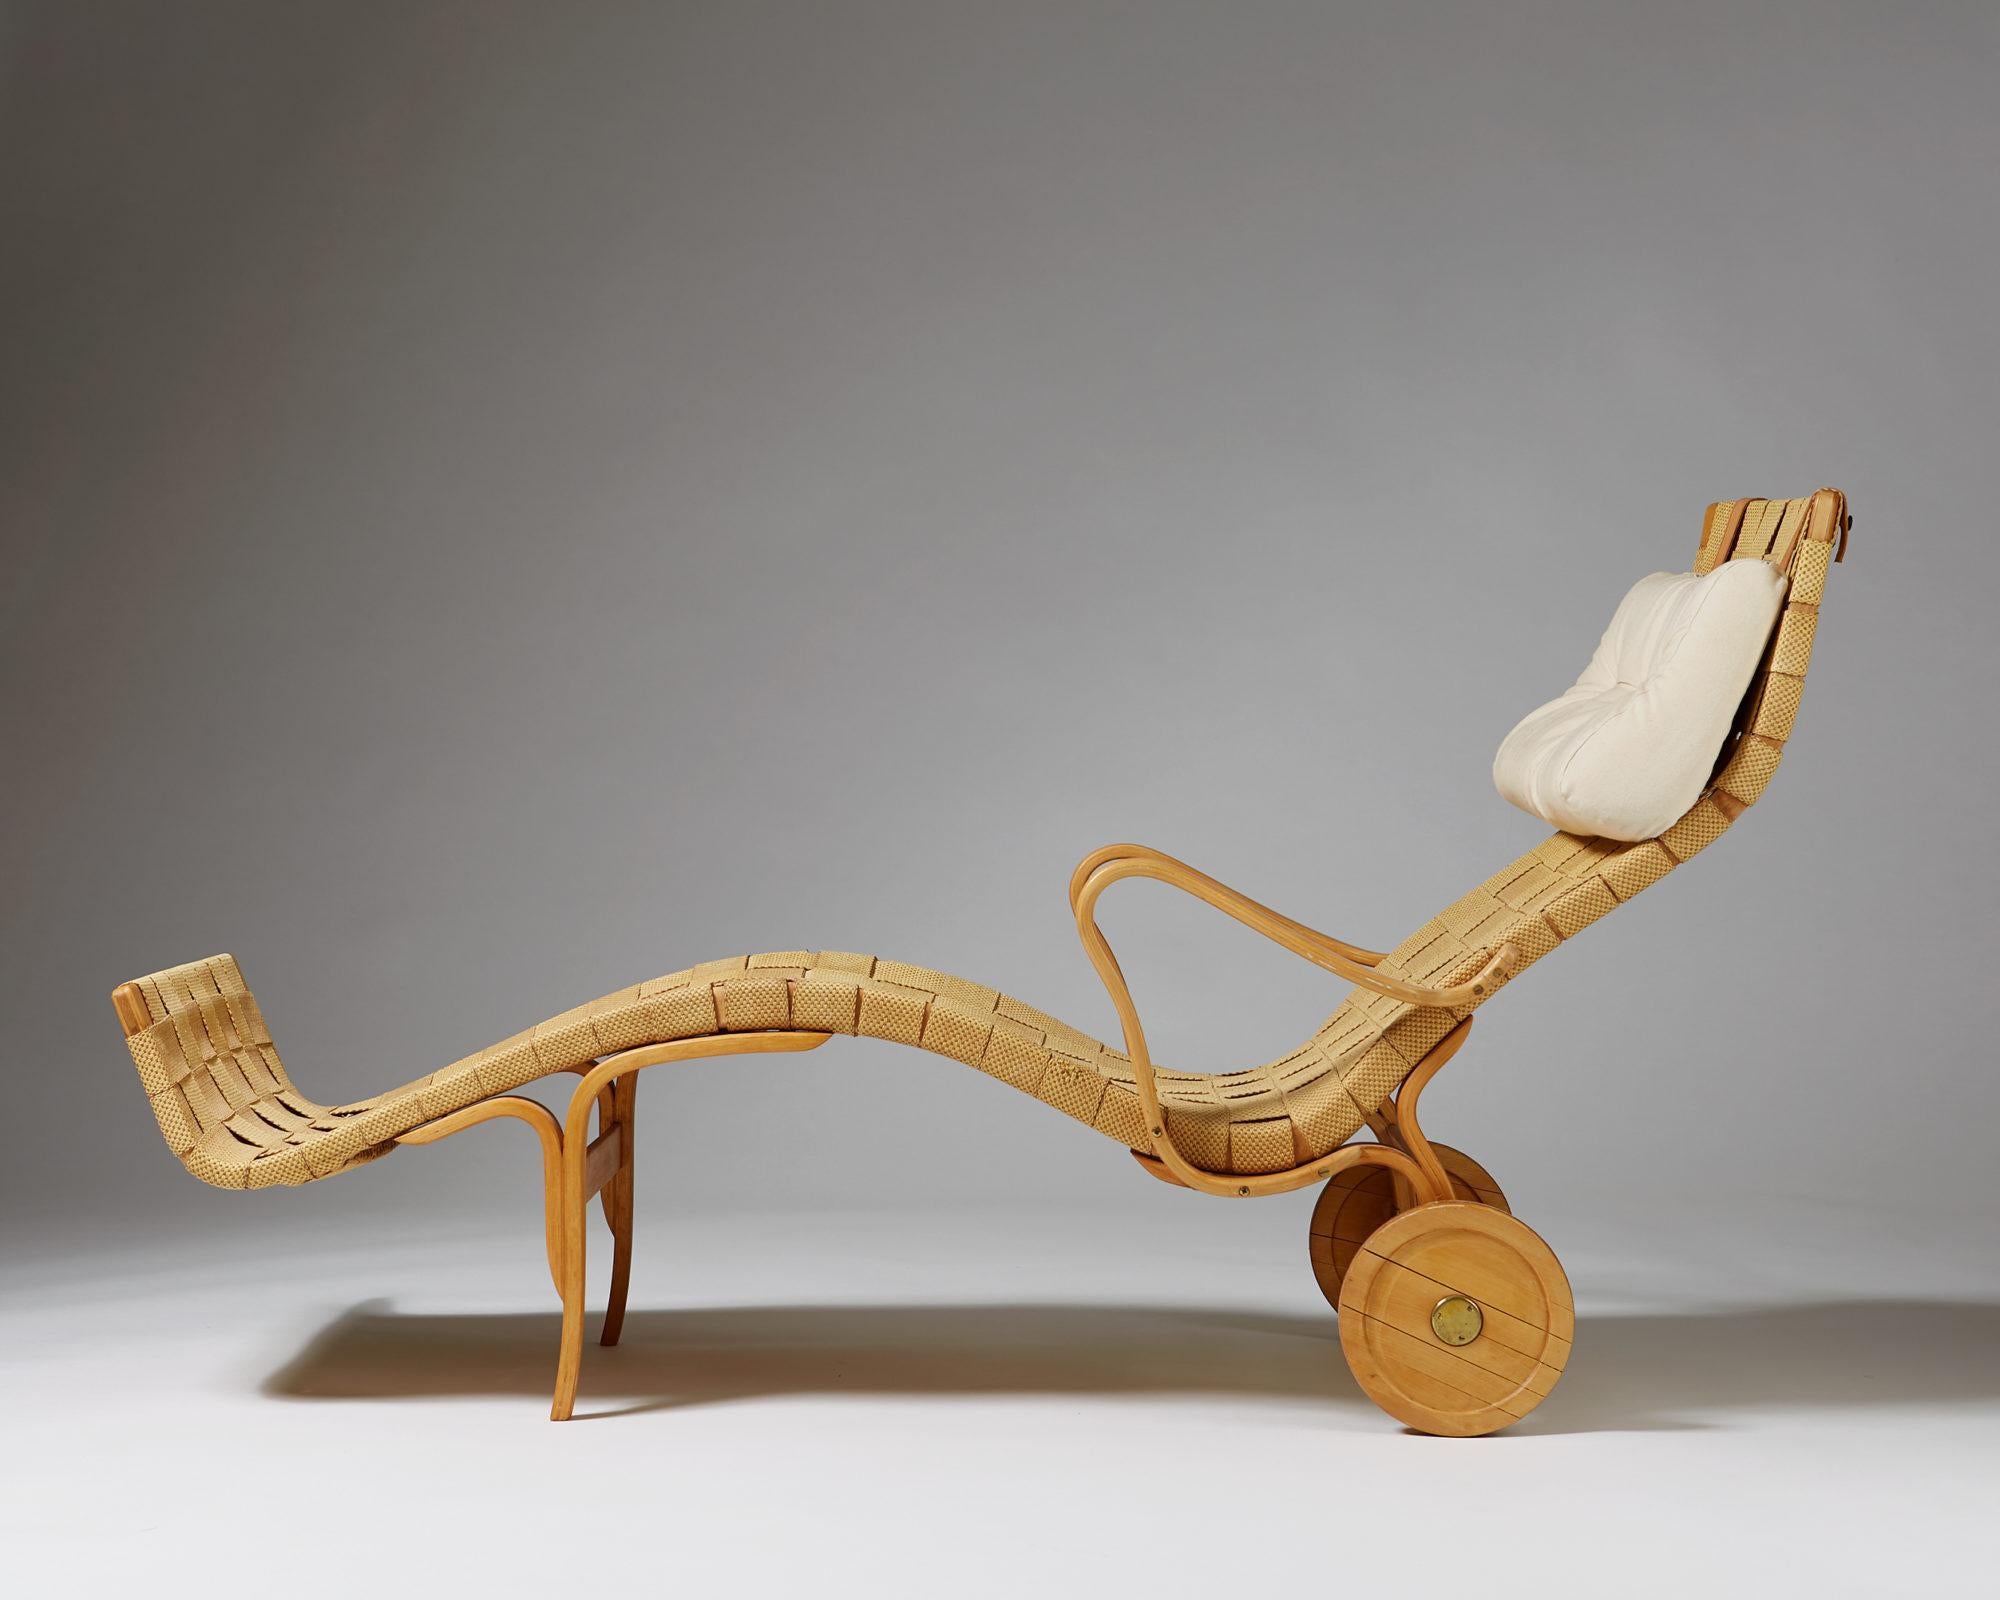 Swedish Chaise Longue Designed by Bruno Mathsson for Karl Mathsson, Sweden, 1940s